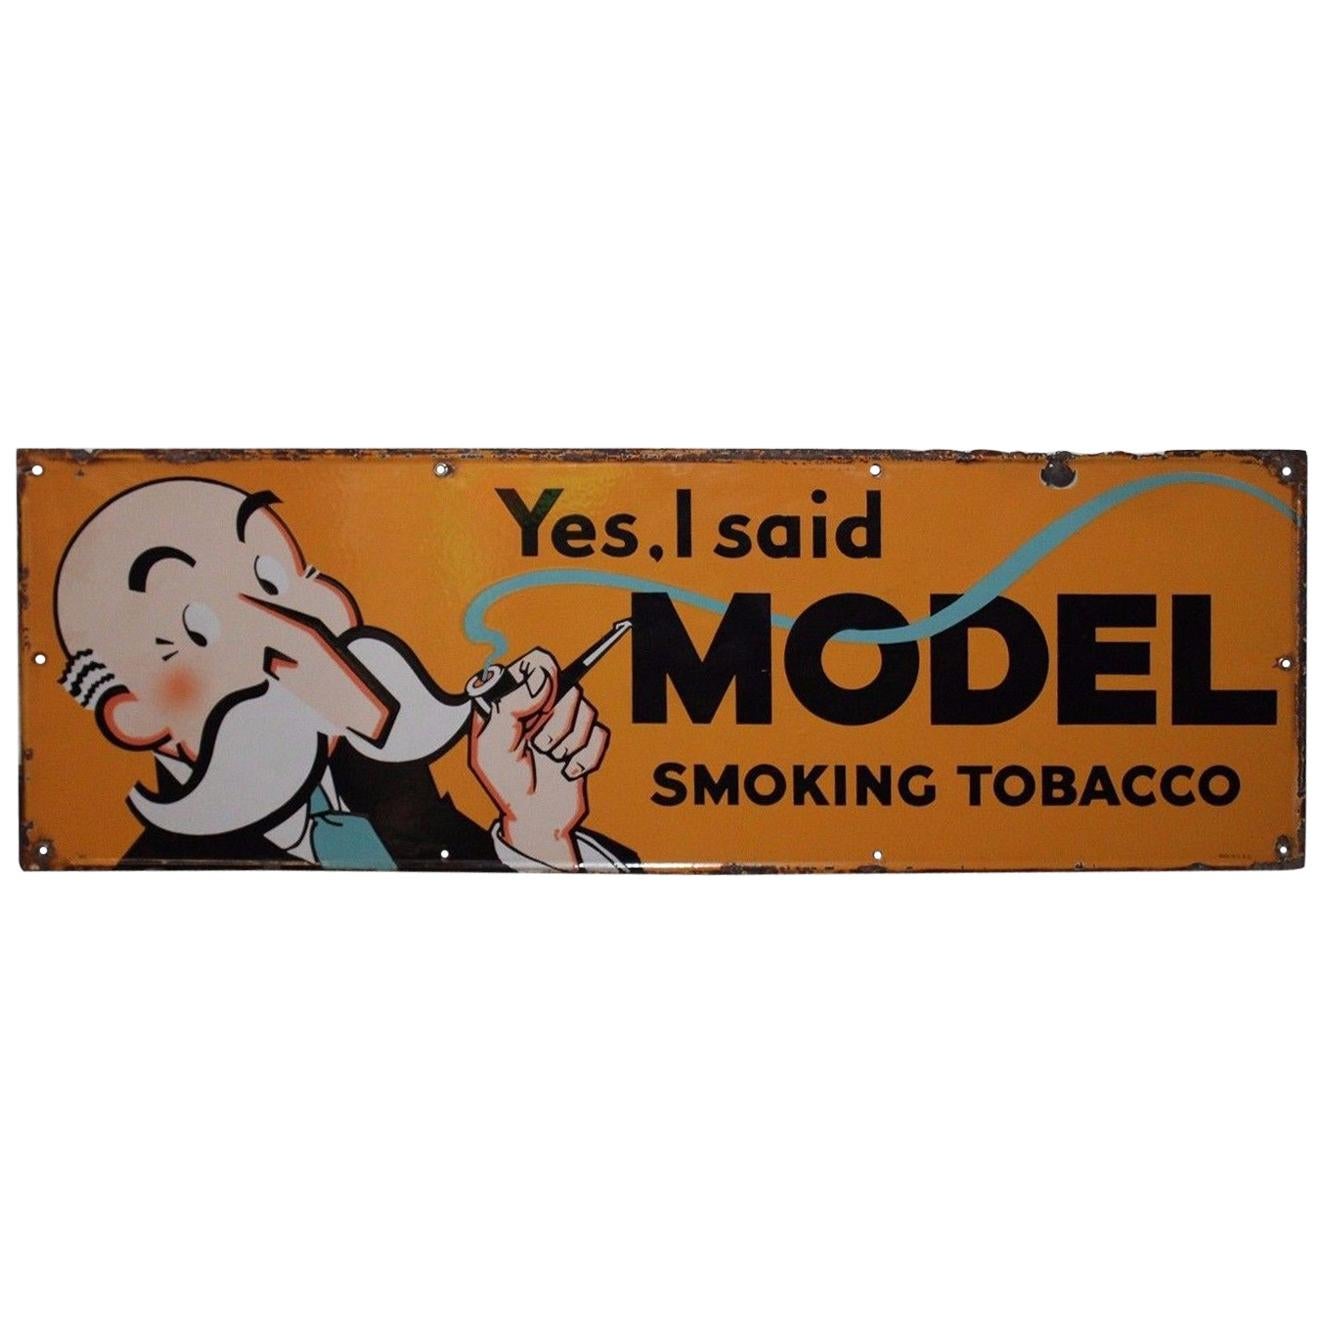 1940s "Yes, I Said" Model Smoking Tobacco Porcelain Sign For Sale